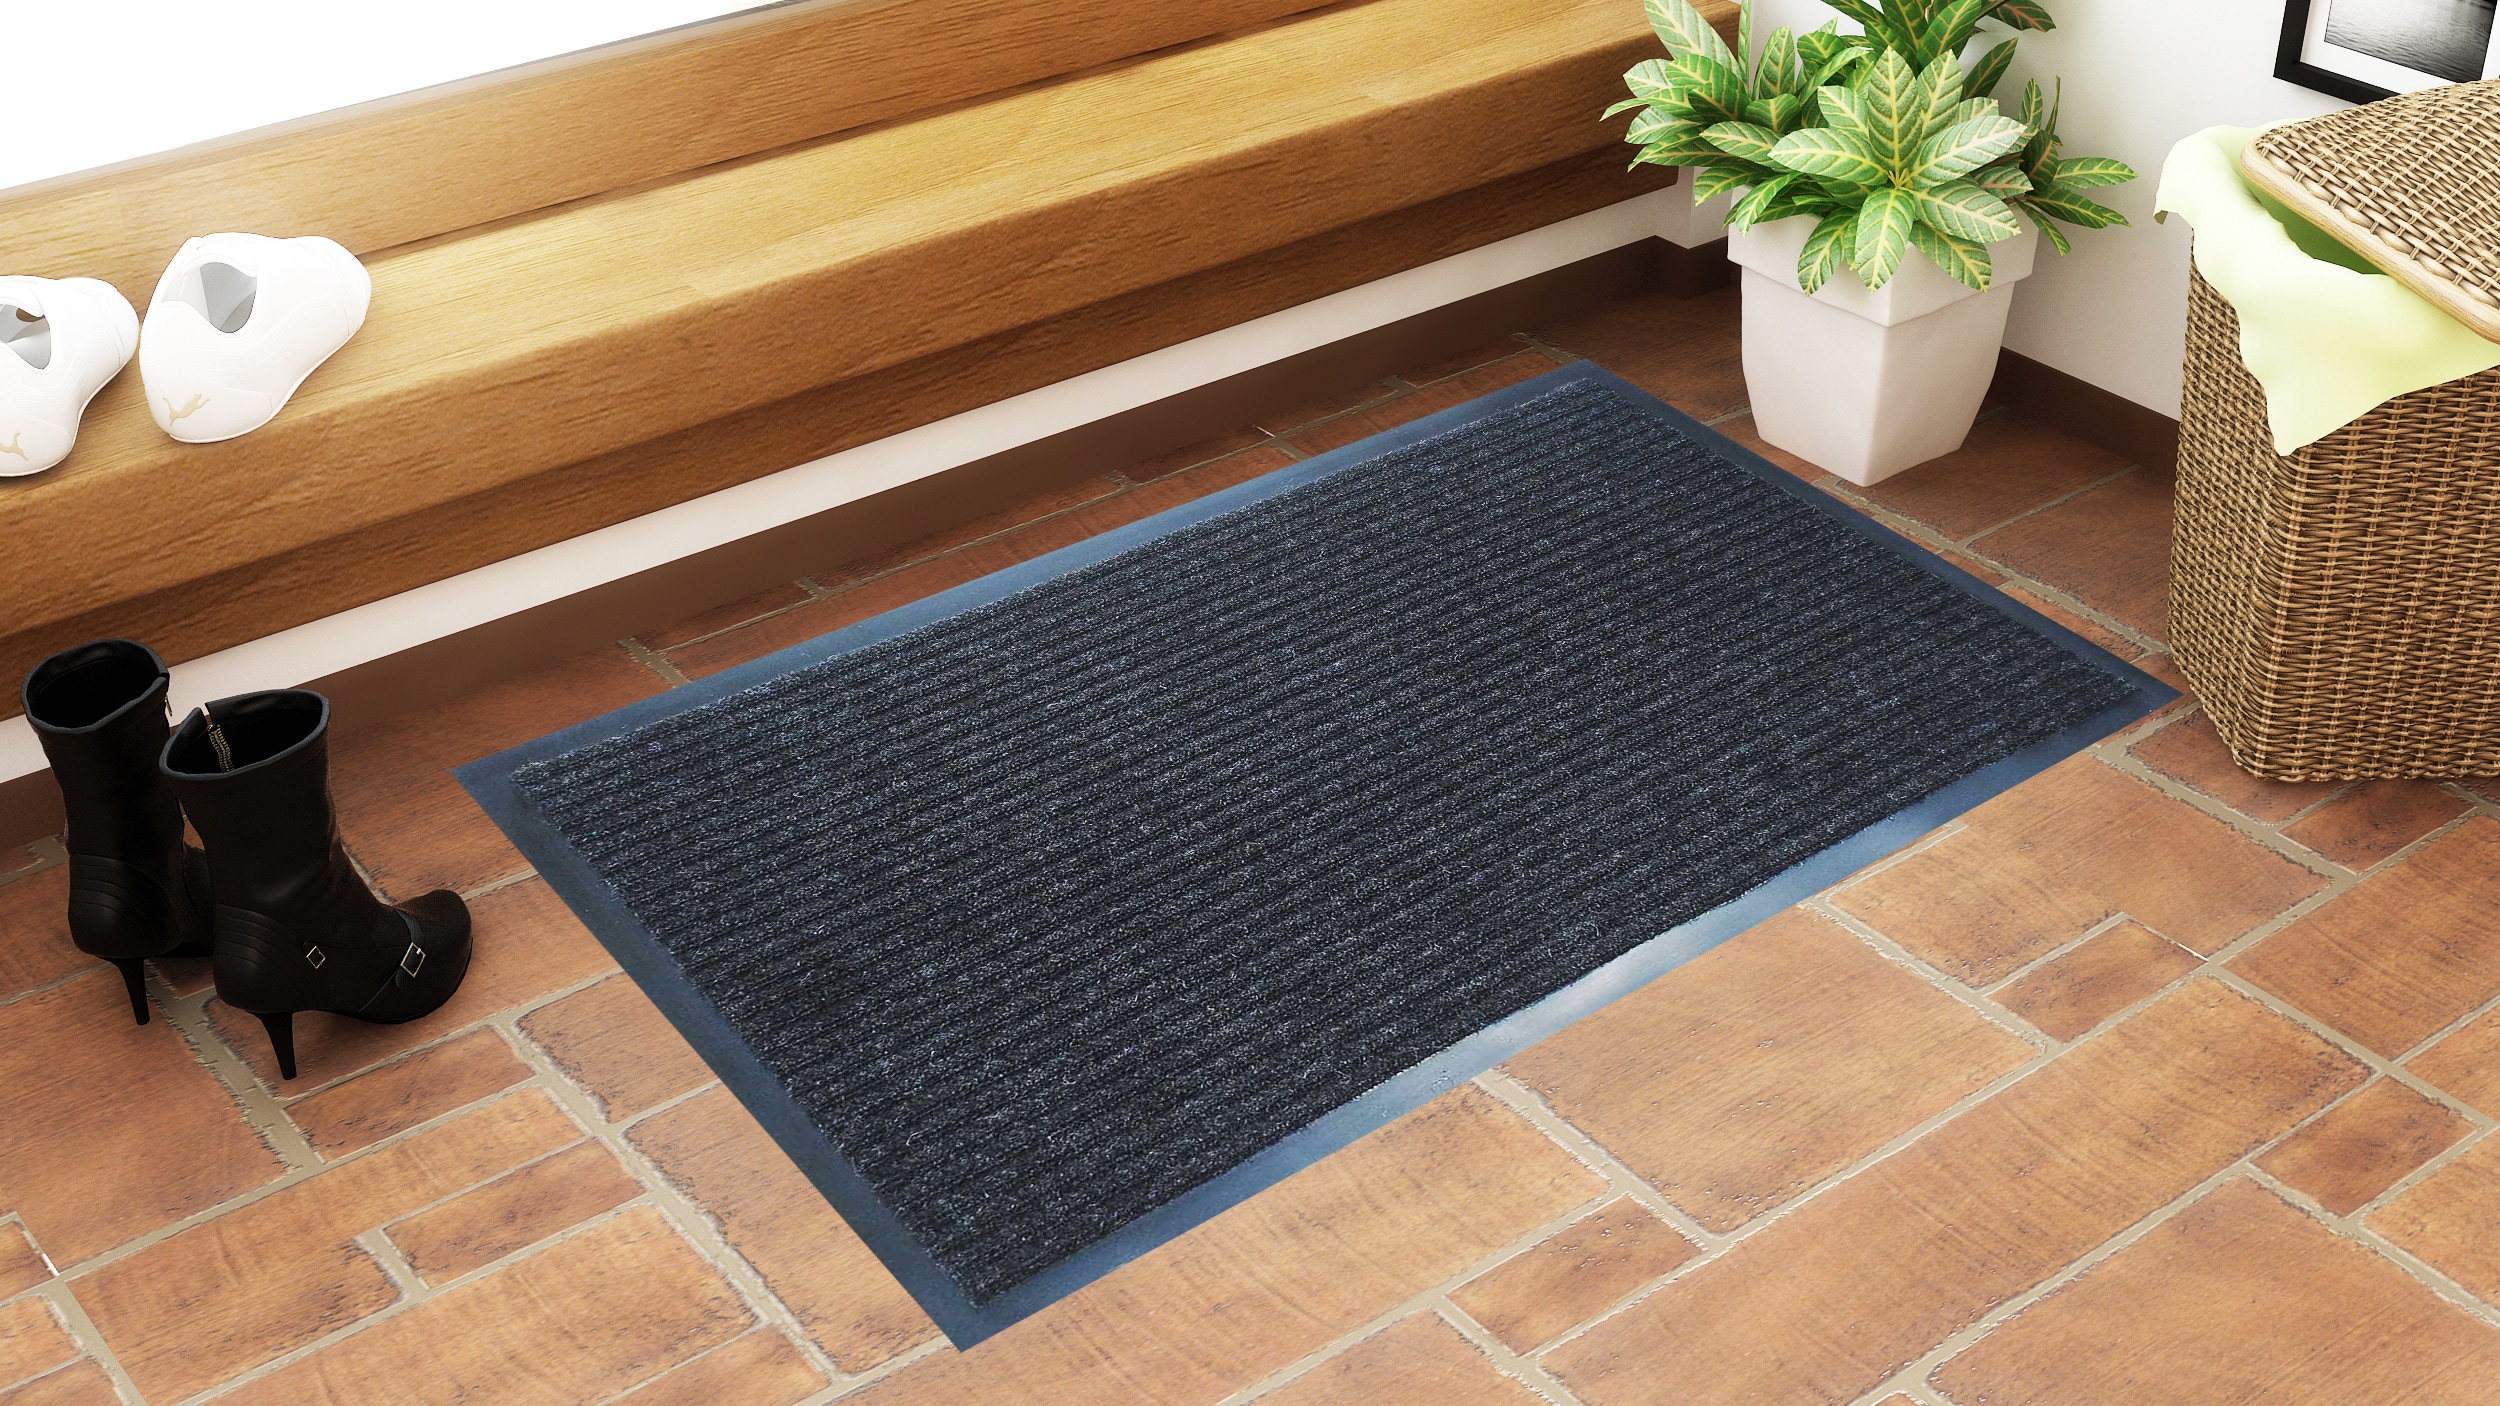 Project Source 3-ft x 3-ft Interlocking Black Rectangular Indoor or Outdoor  Anti-fatigue Mat in the Mats department at